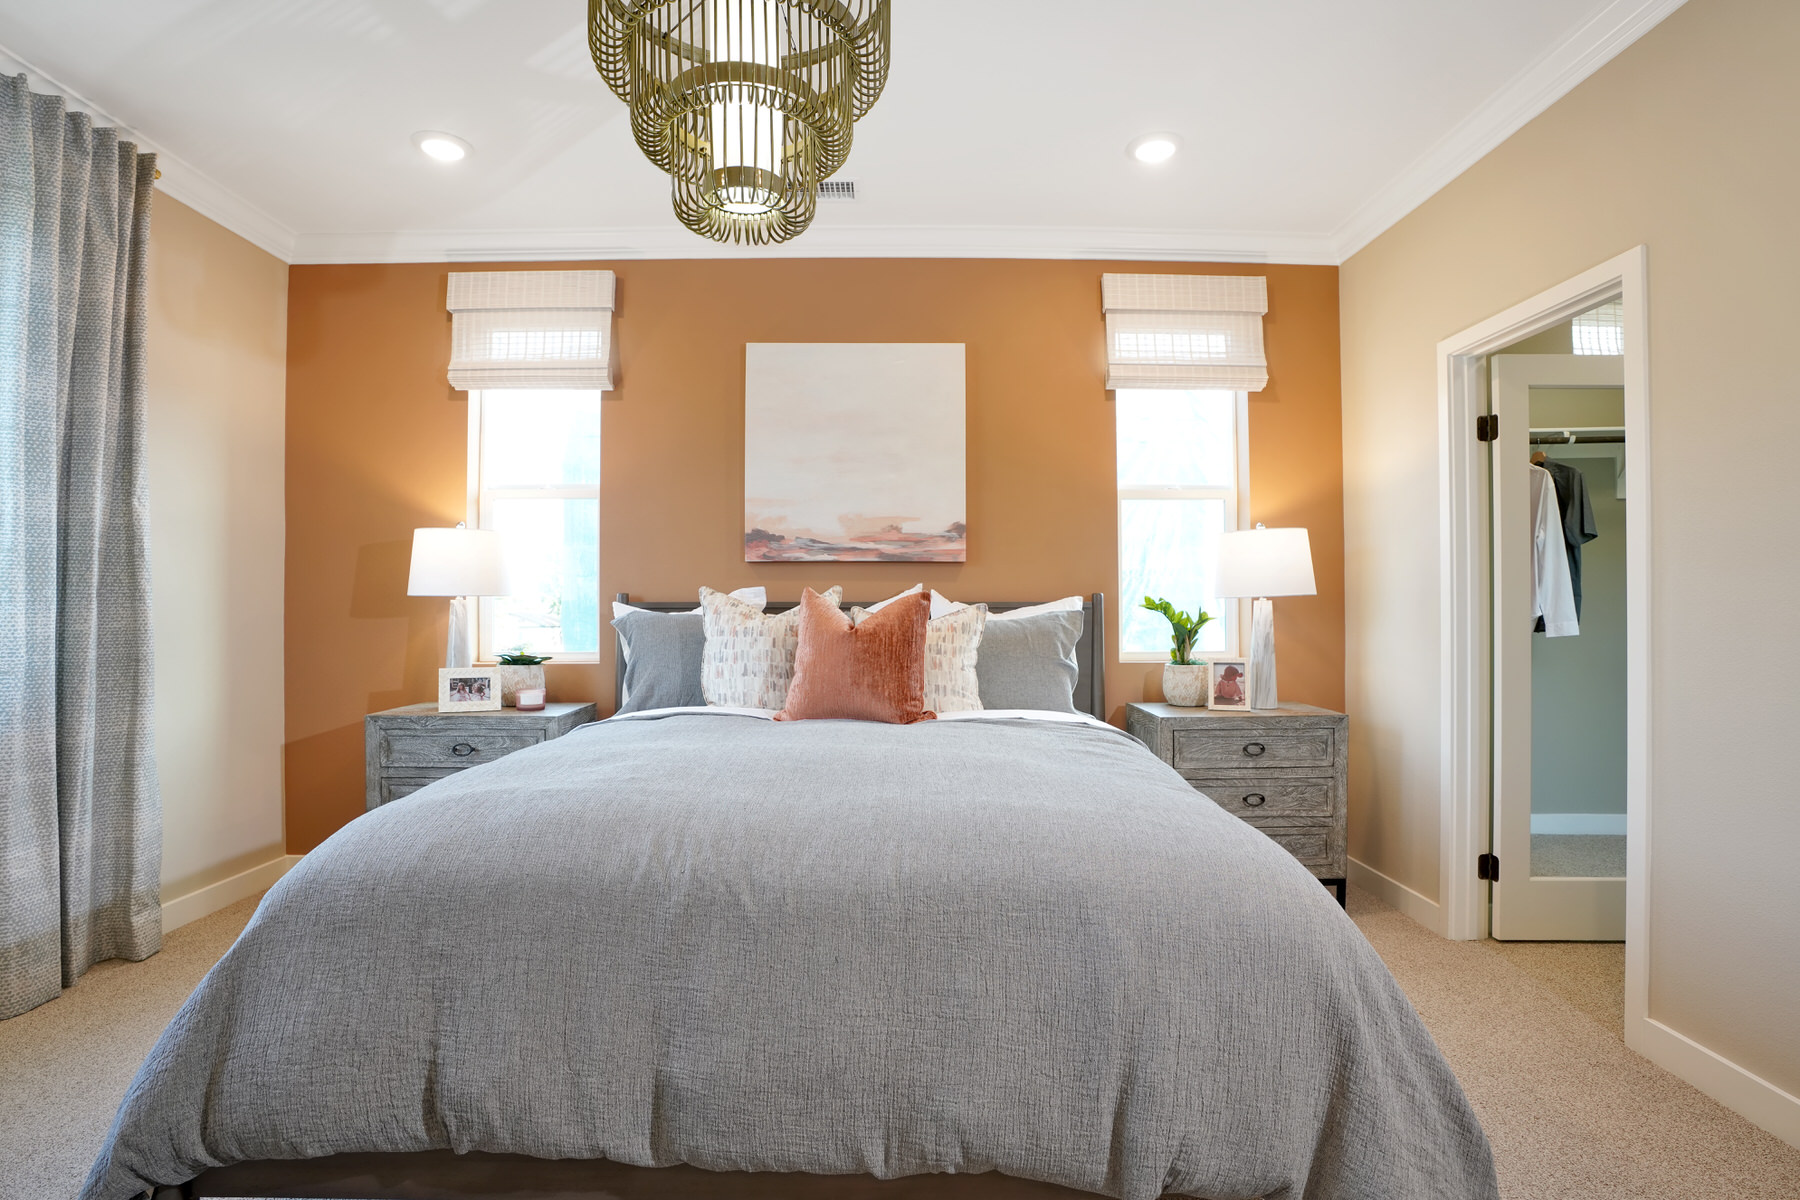 Primary Bedroom in Plan 4A at Townes at Magnolia by Melia Homes in Anaheim, CA